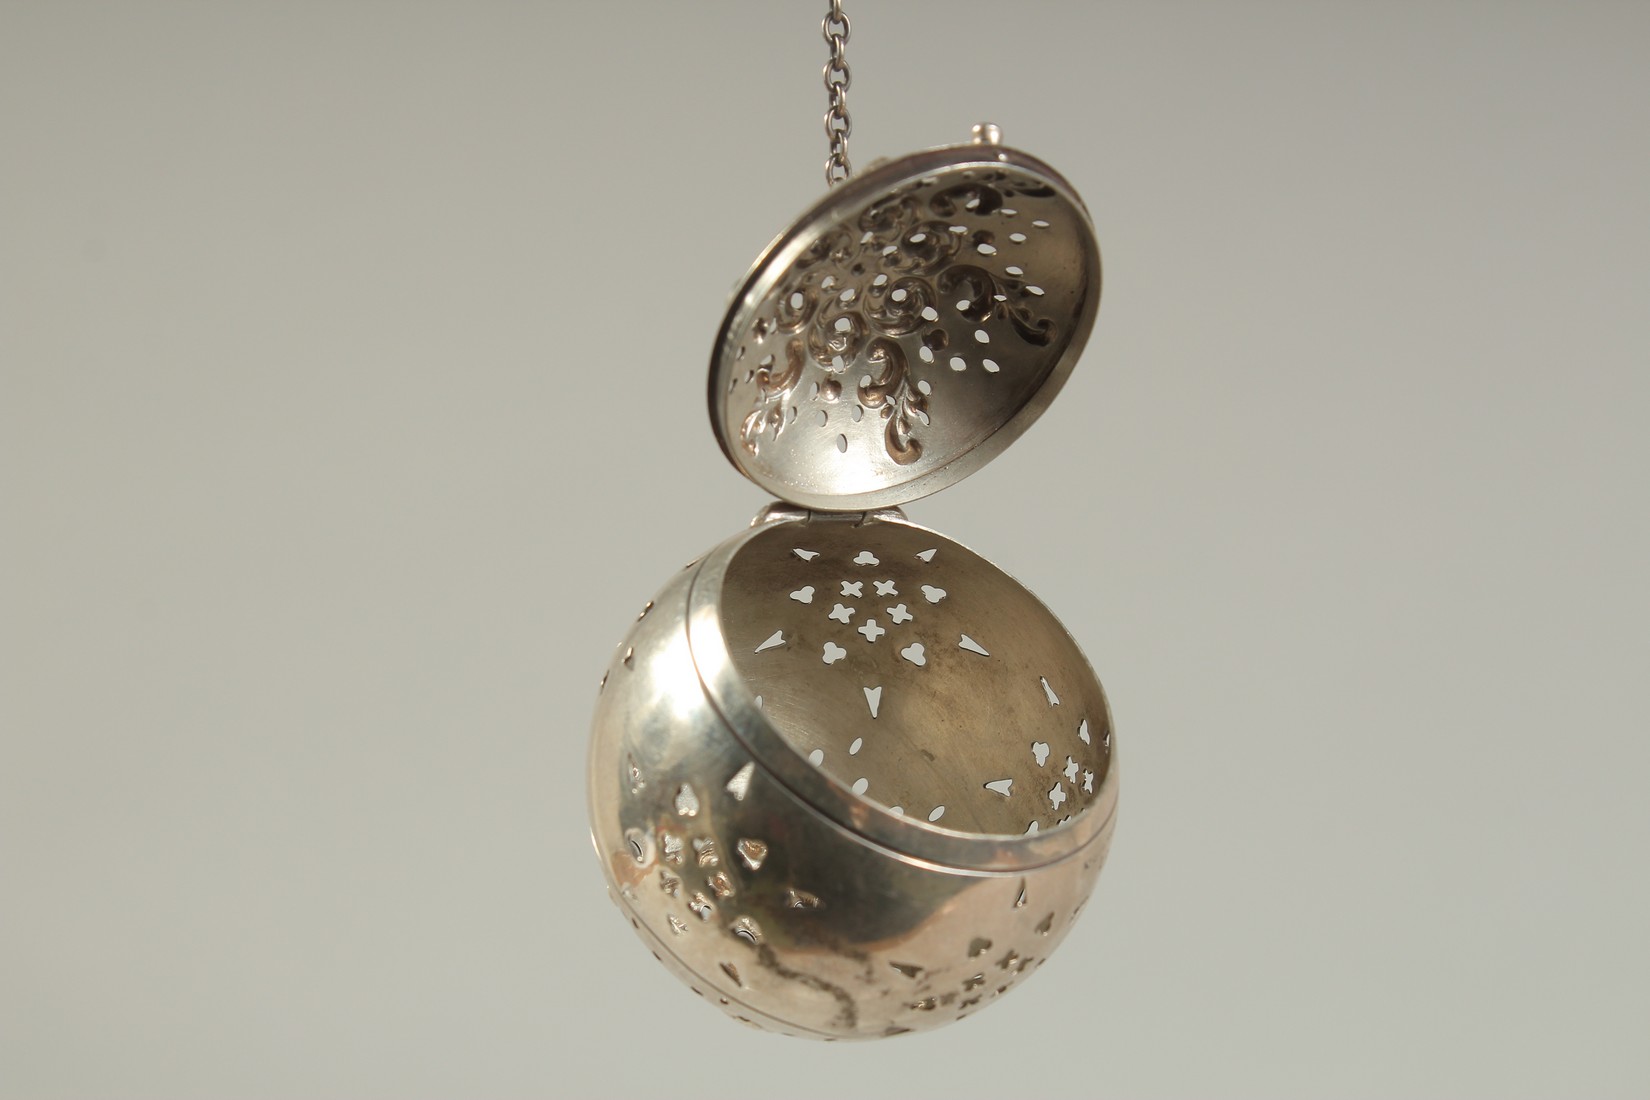 A SILVER GLOBULAR TEA INFUSER on a chain. 1.75ins diameter. - Image 4 of 4